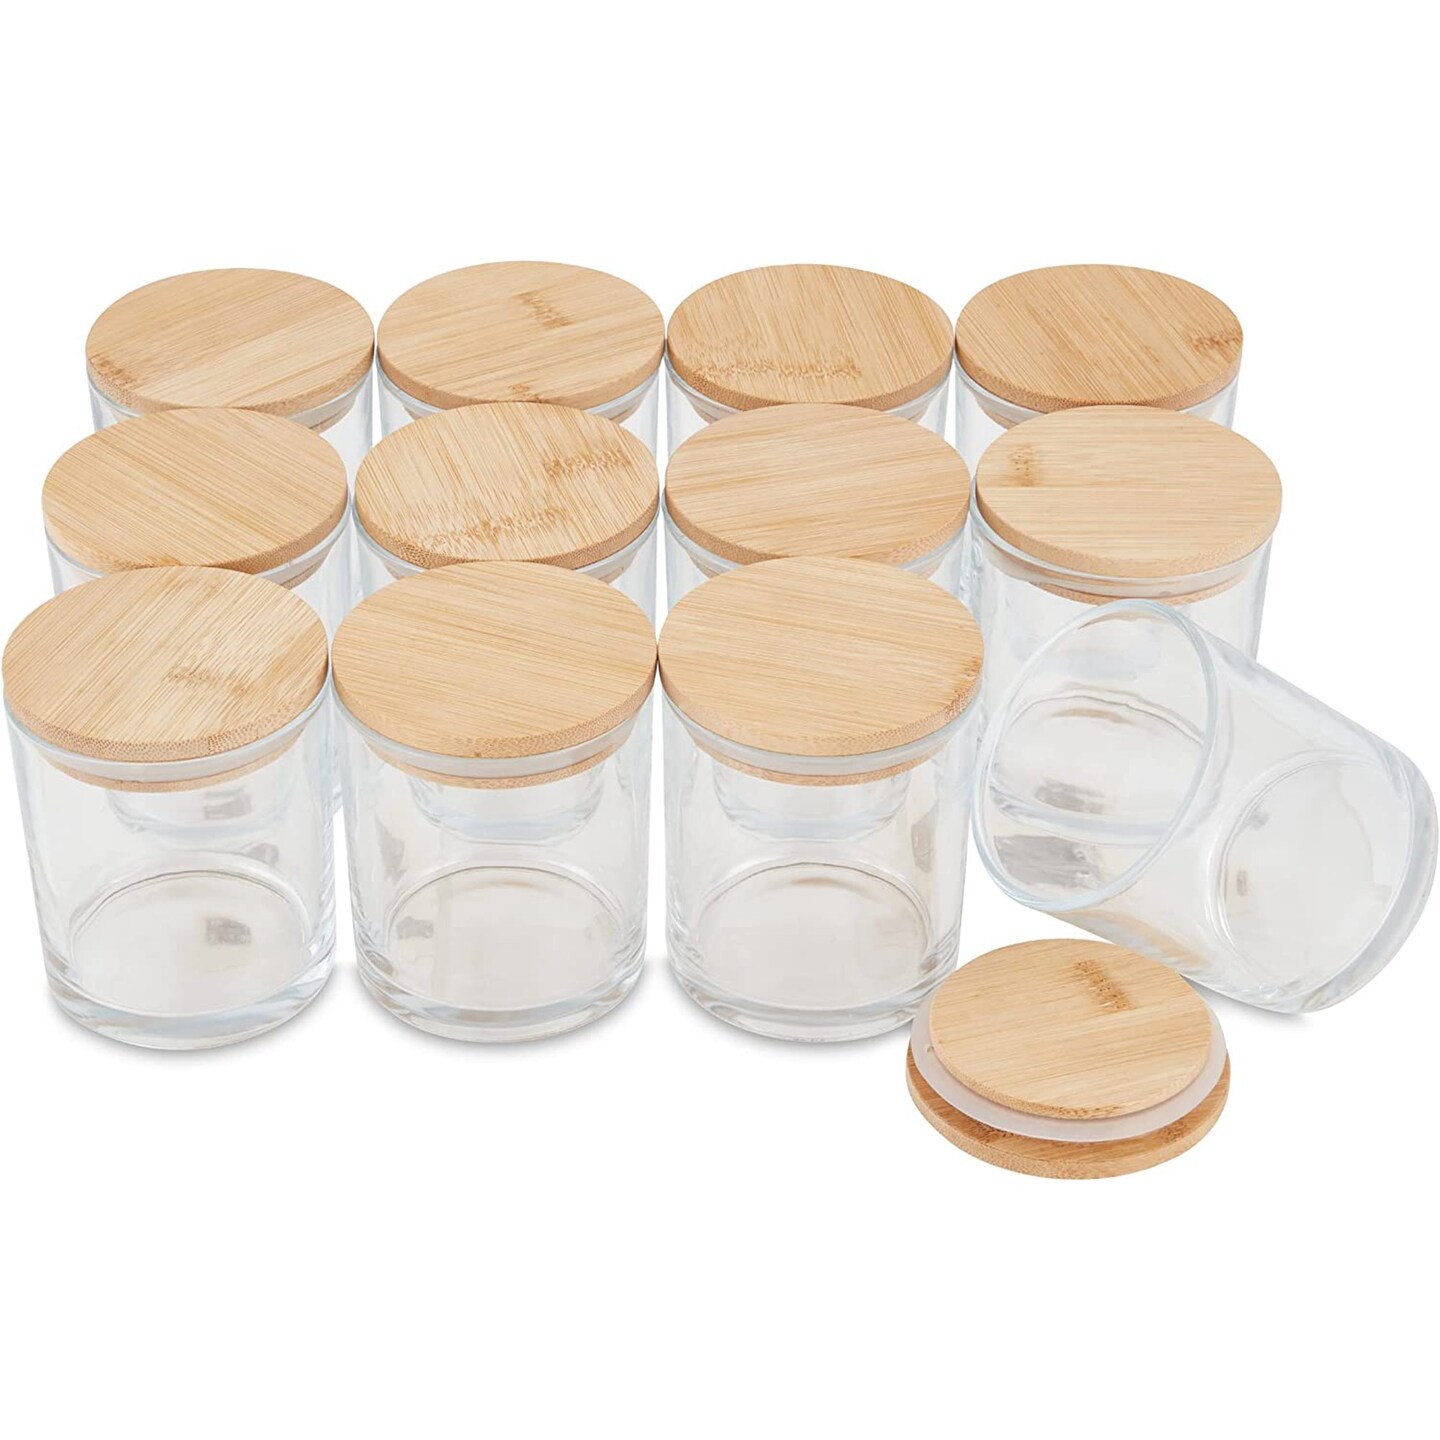 12.5 oz Clear Glass Candle Jars (Bulk), Lids Not Included